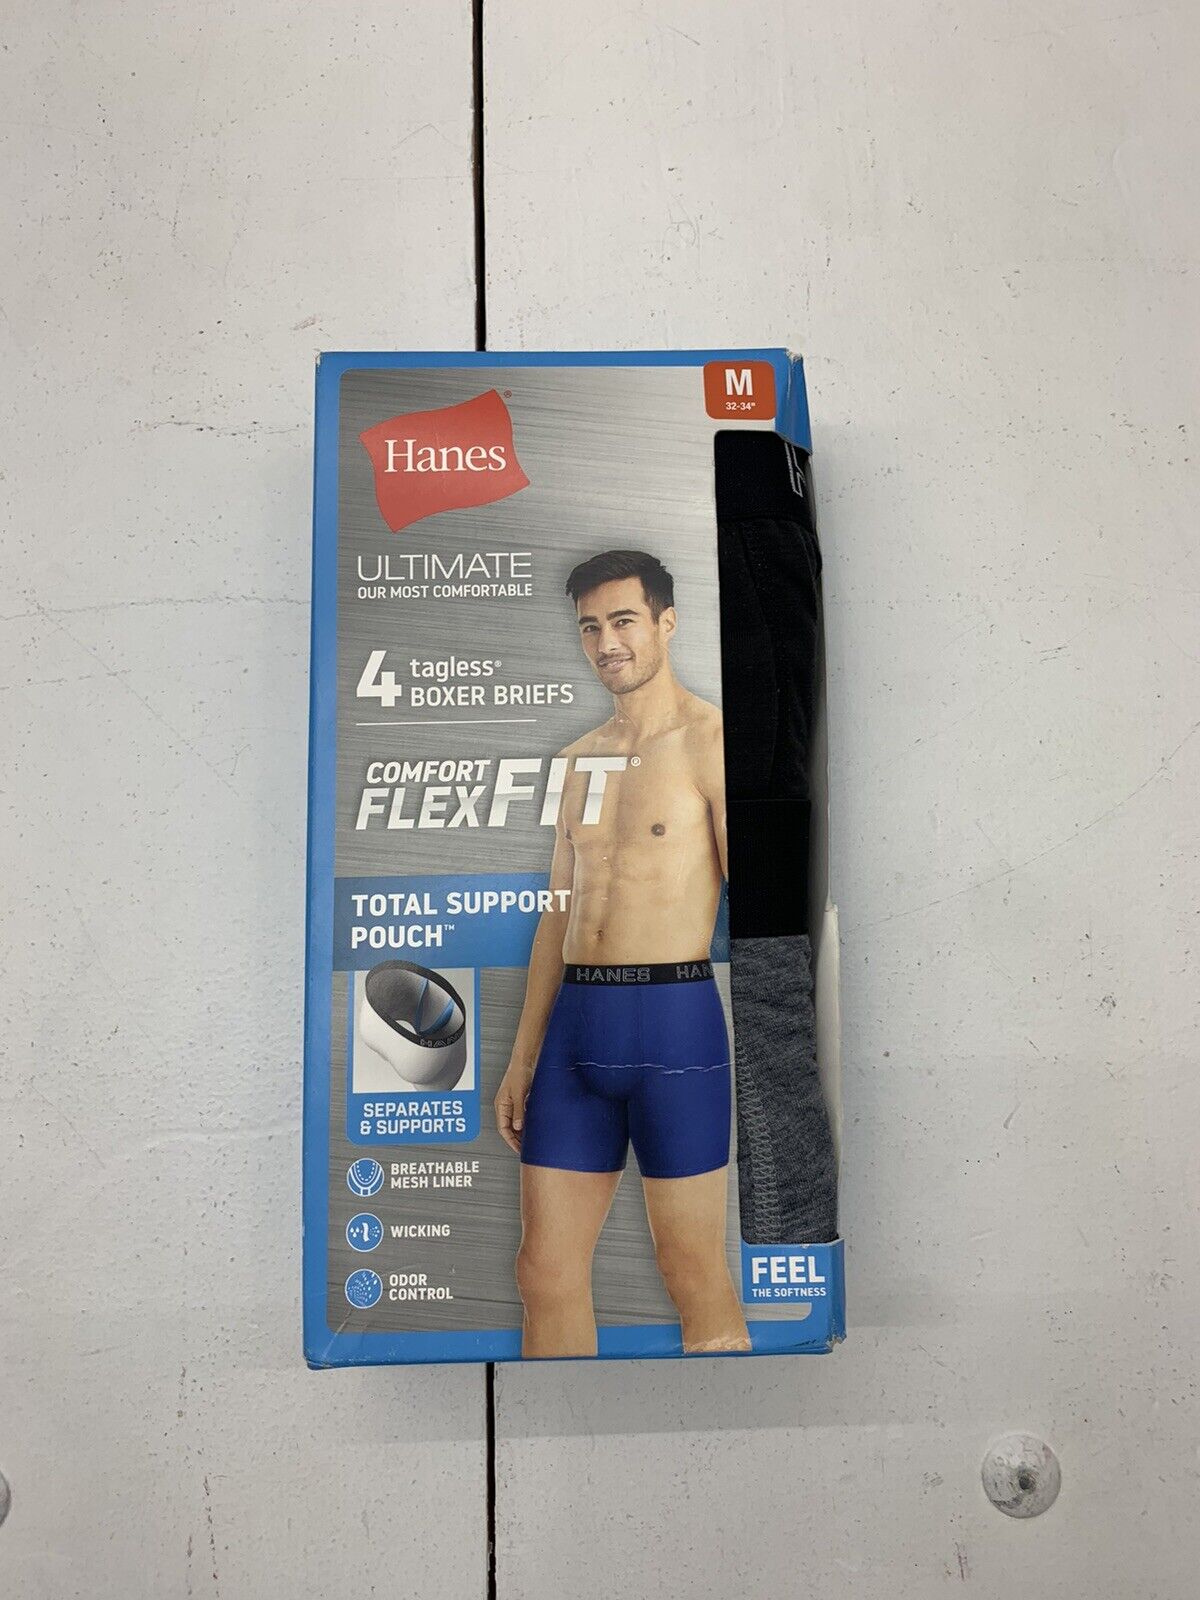 Hanes Ultimate Comfort Flex Fit Total Support Pouch Boxer Brief 4